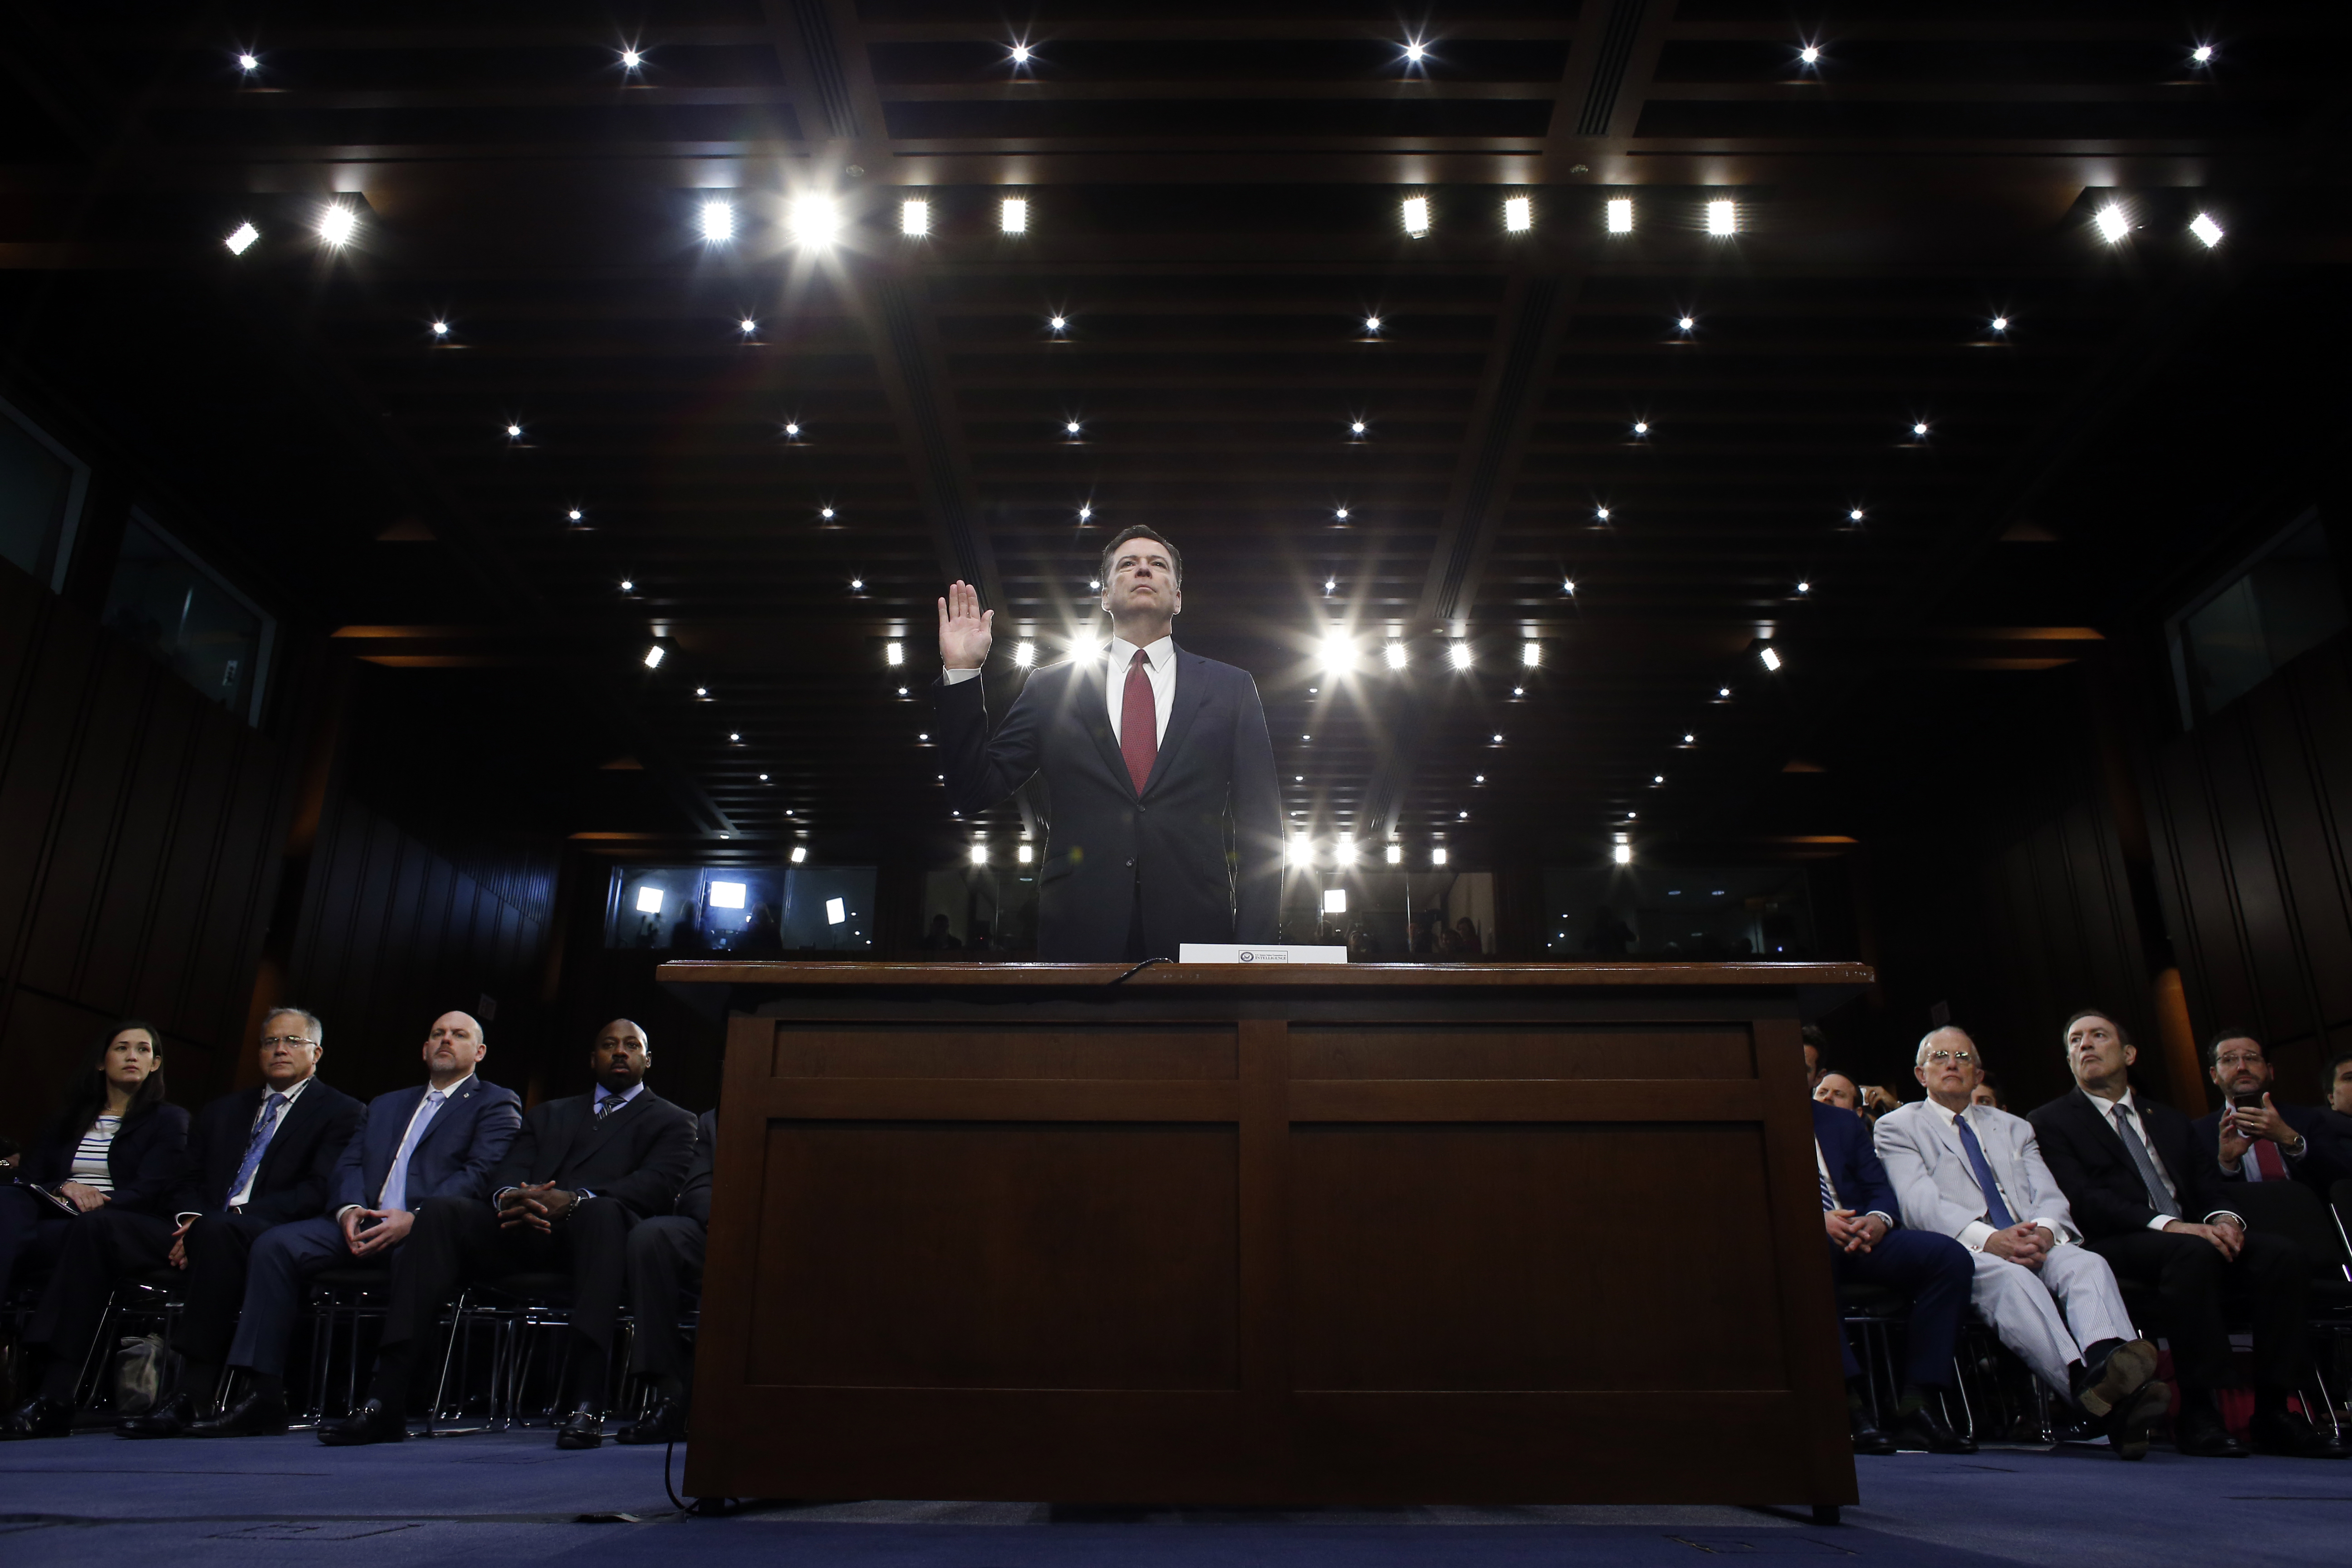 Former FBI Director James Comey is sworn in during a Senate Intelligence Committee hearing on Capitol Hill, Thursday, June 8, 2017, in Washington. (AP Photo/Alex Brandon)